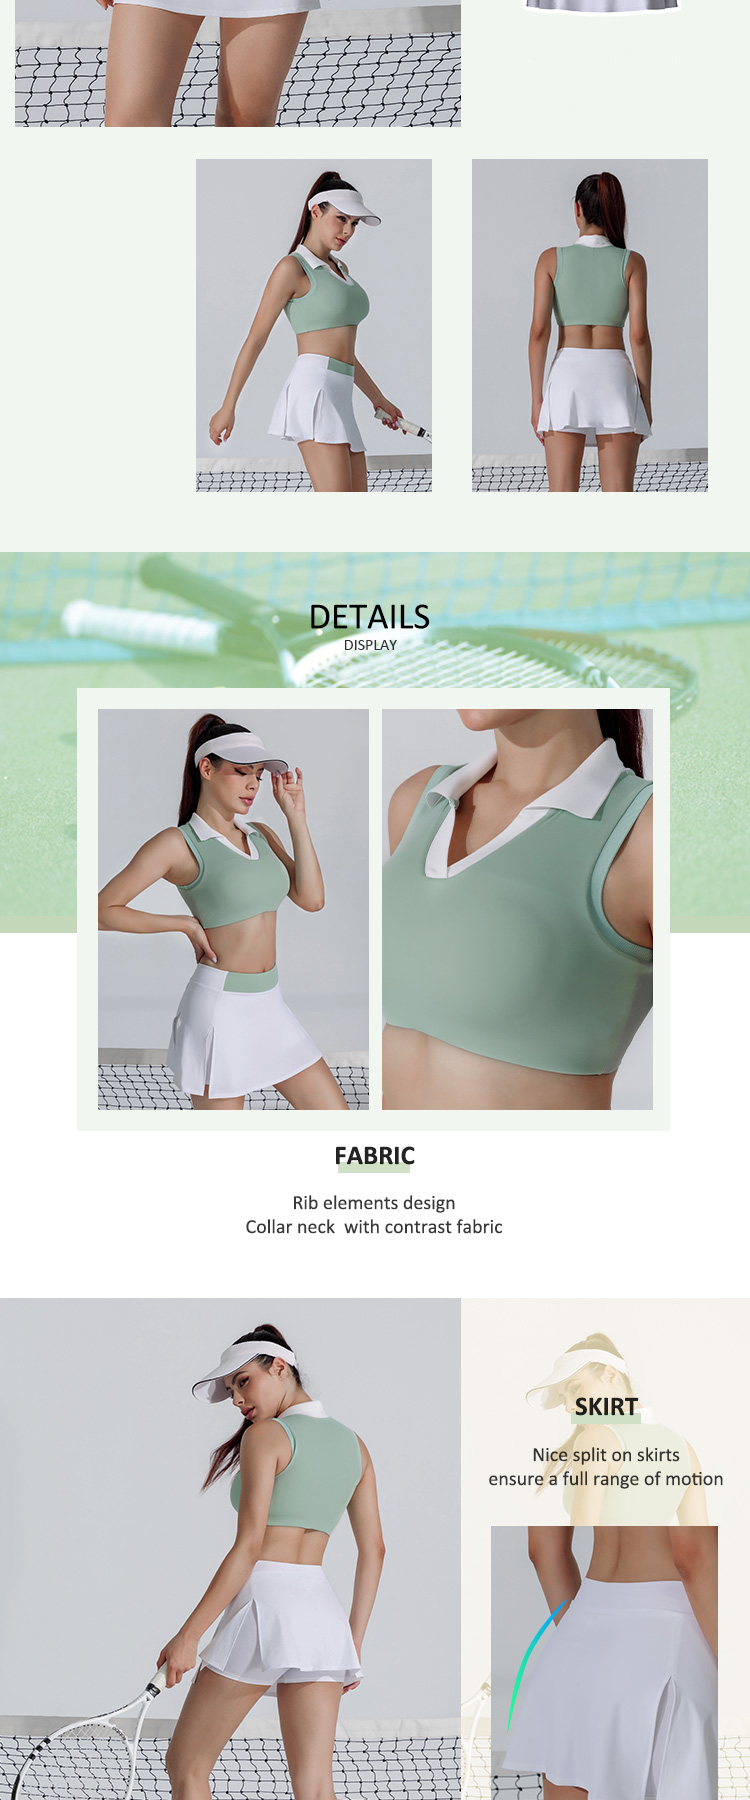 INGOR soft woman tennis clothes solutions for girls-3